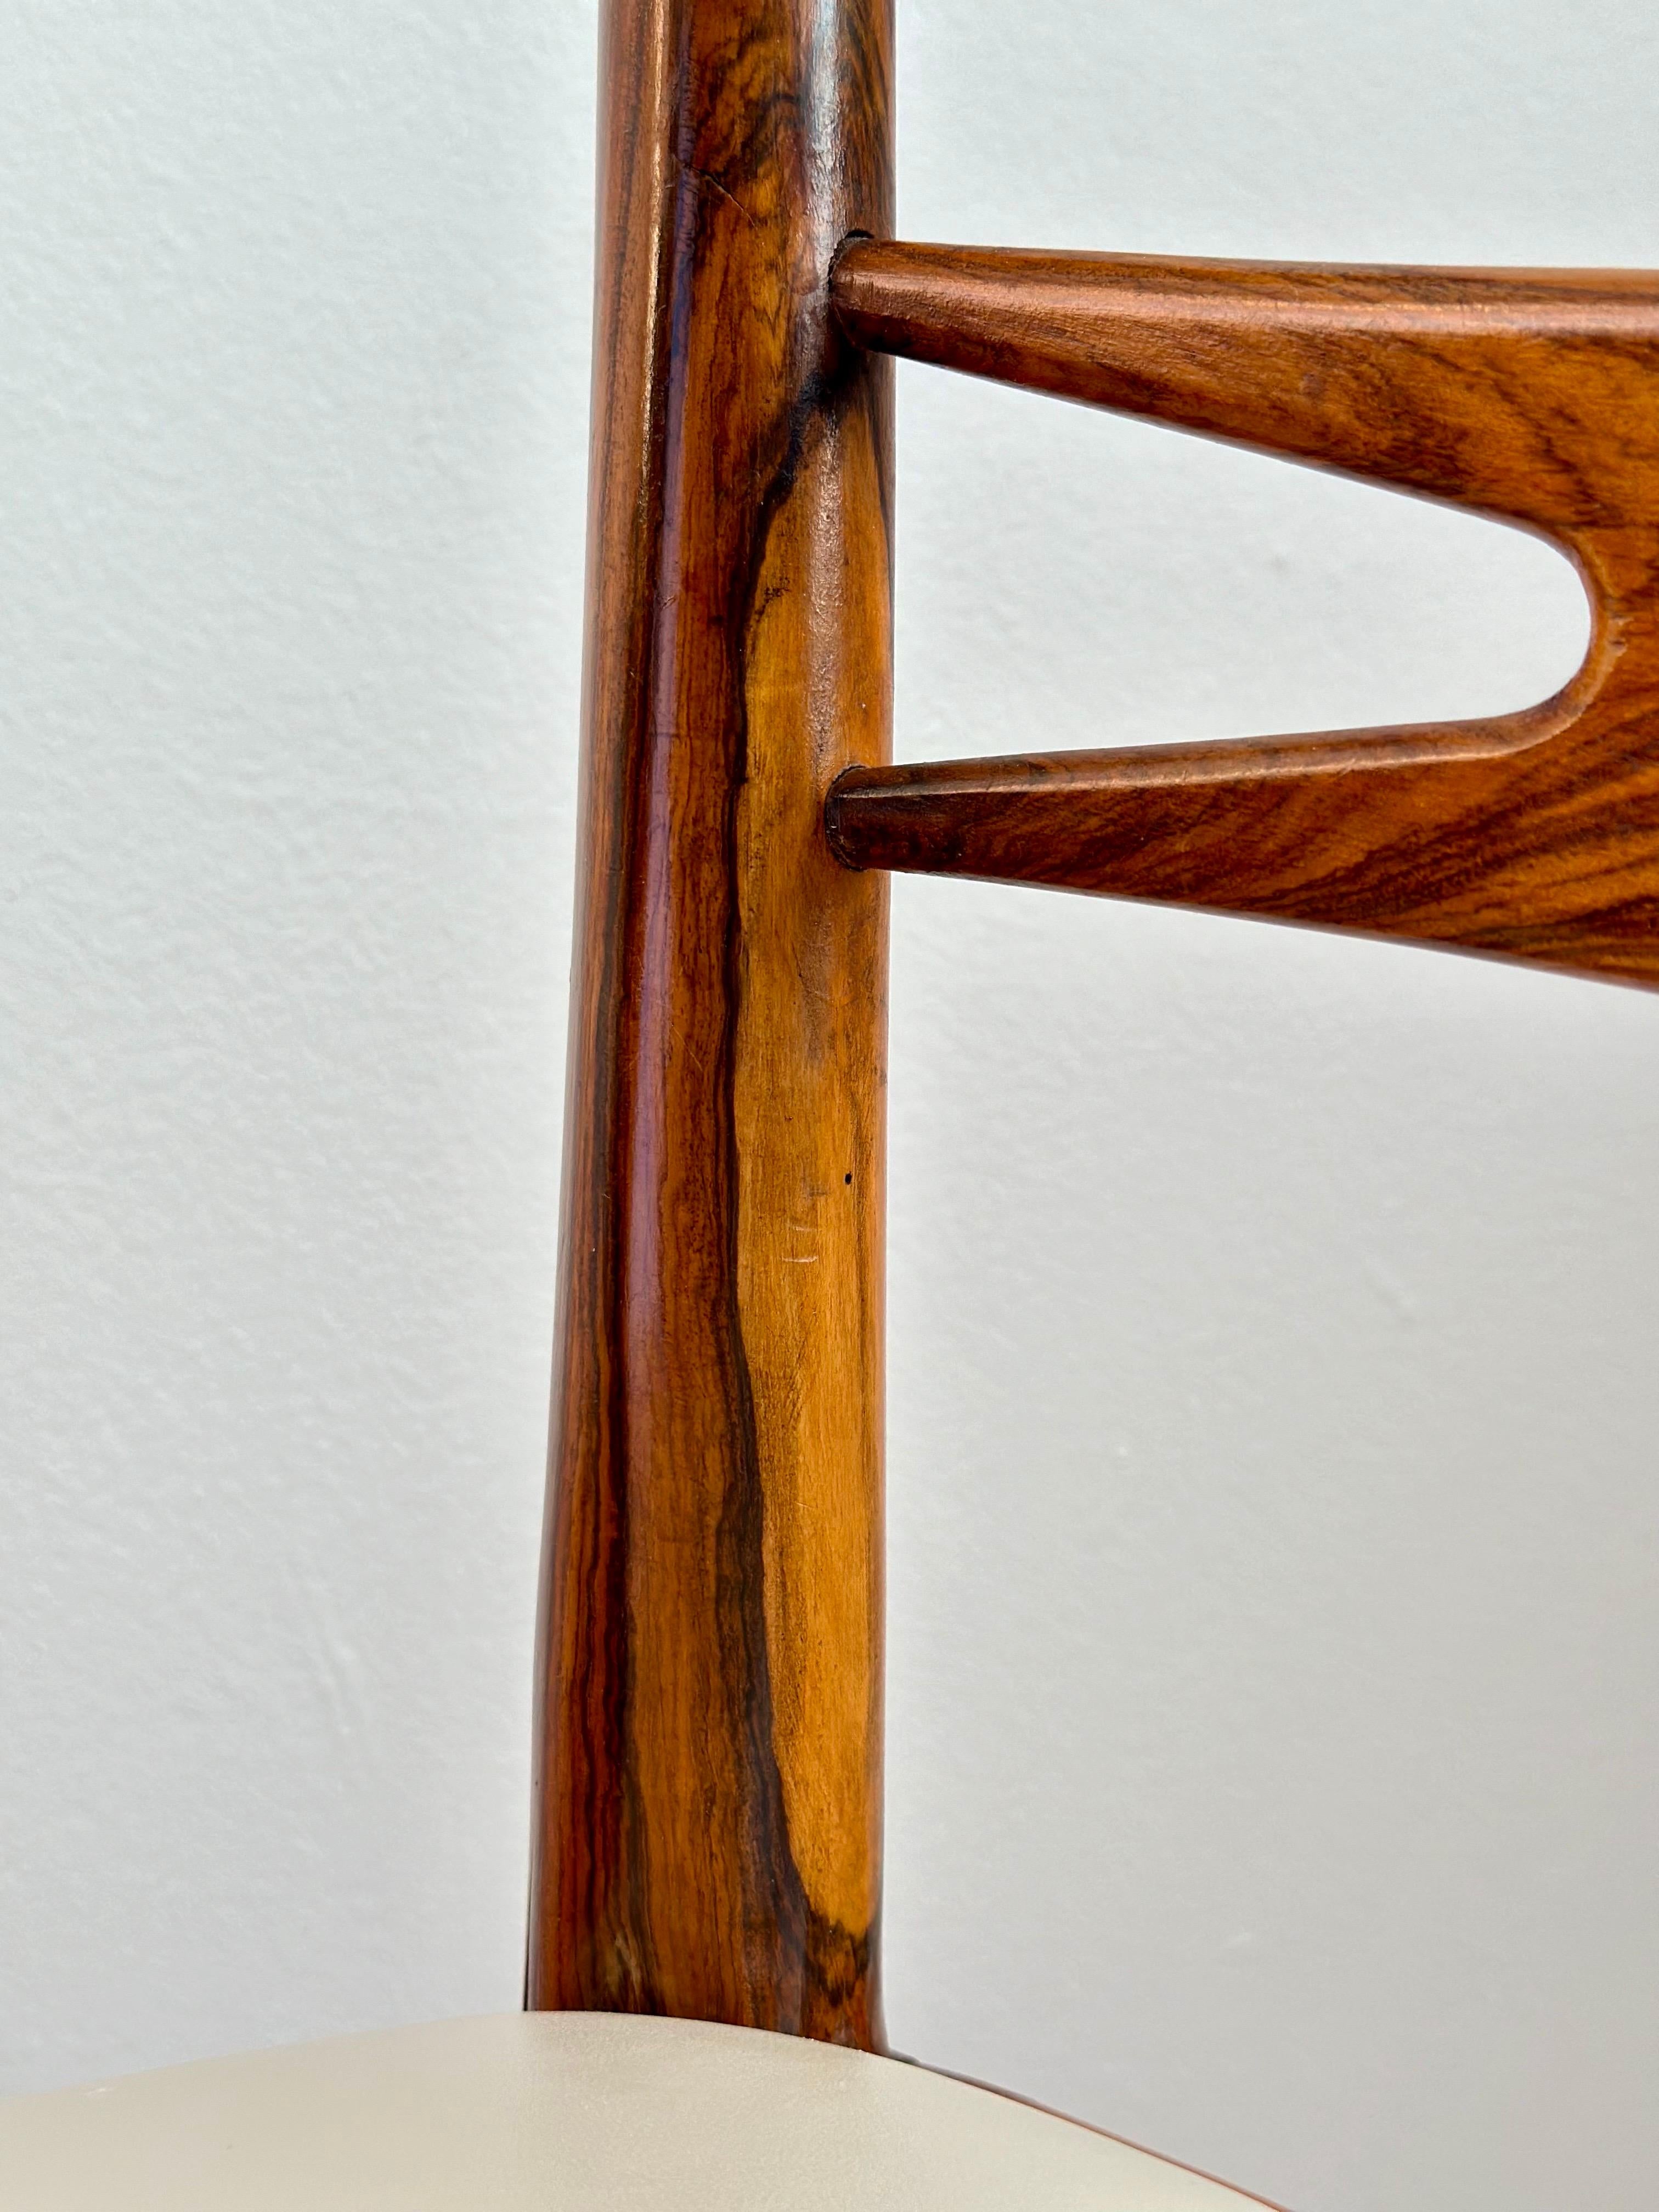 Giuseppe Scapinelli Brazilian Modern Chair in Caviuna Rosewood and Leather In Good Condition For Sale In Brooklyn, NY